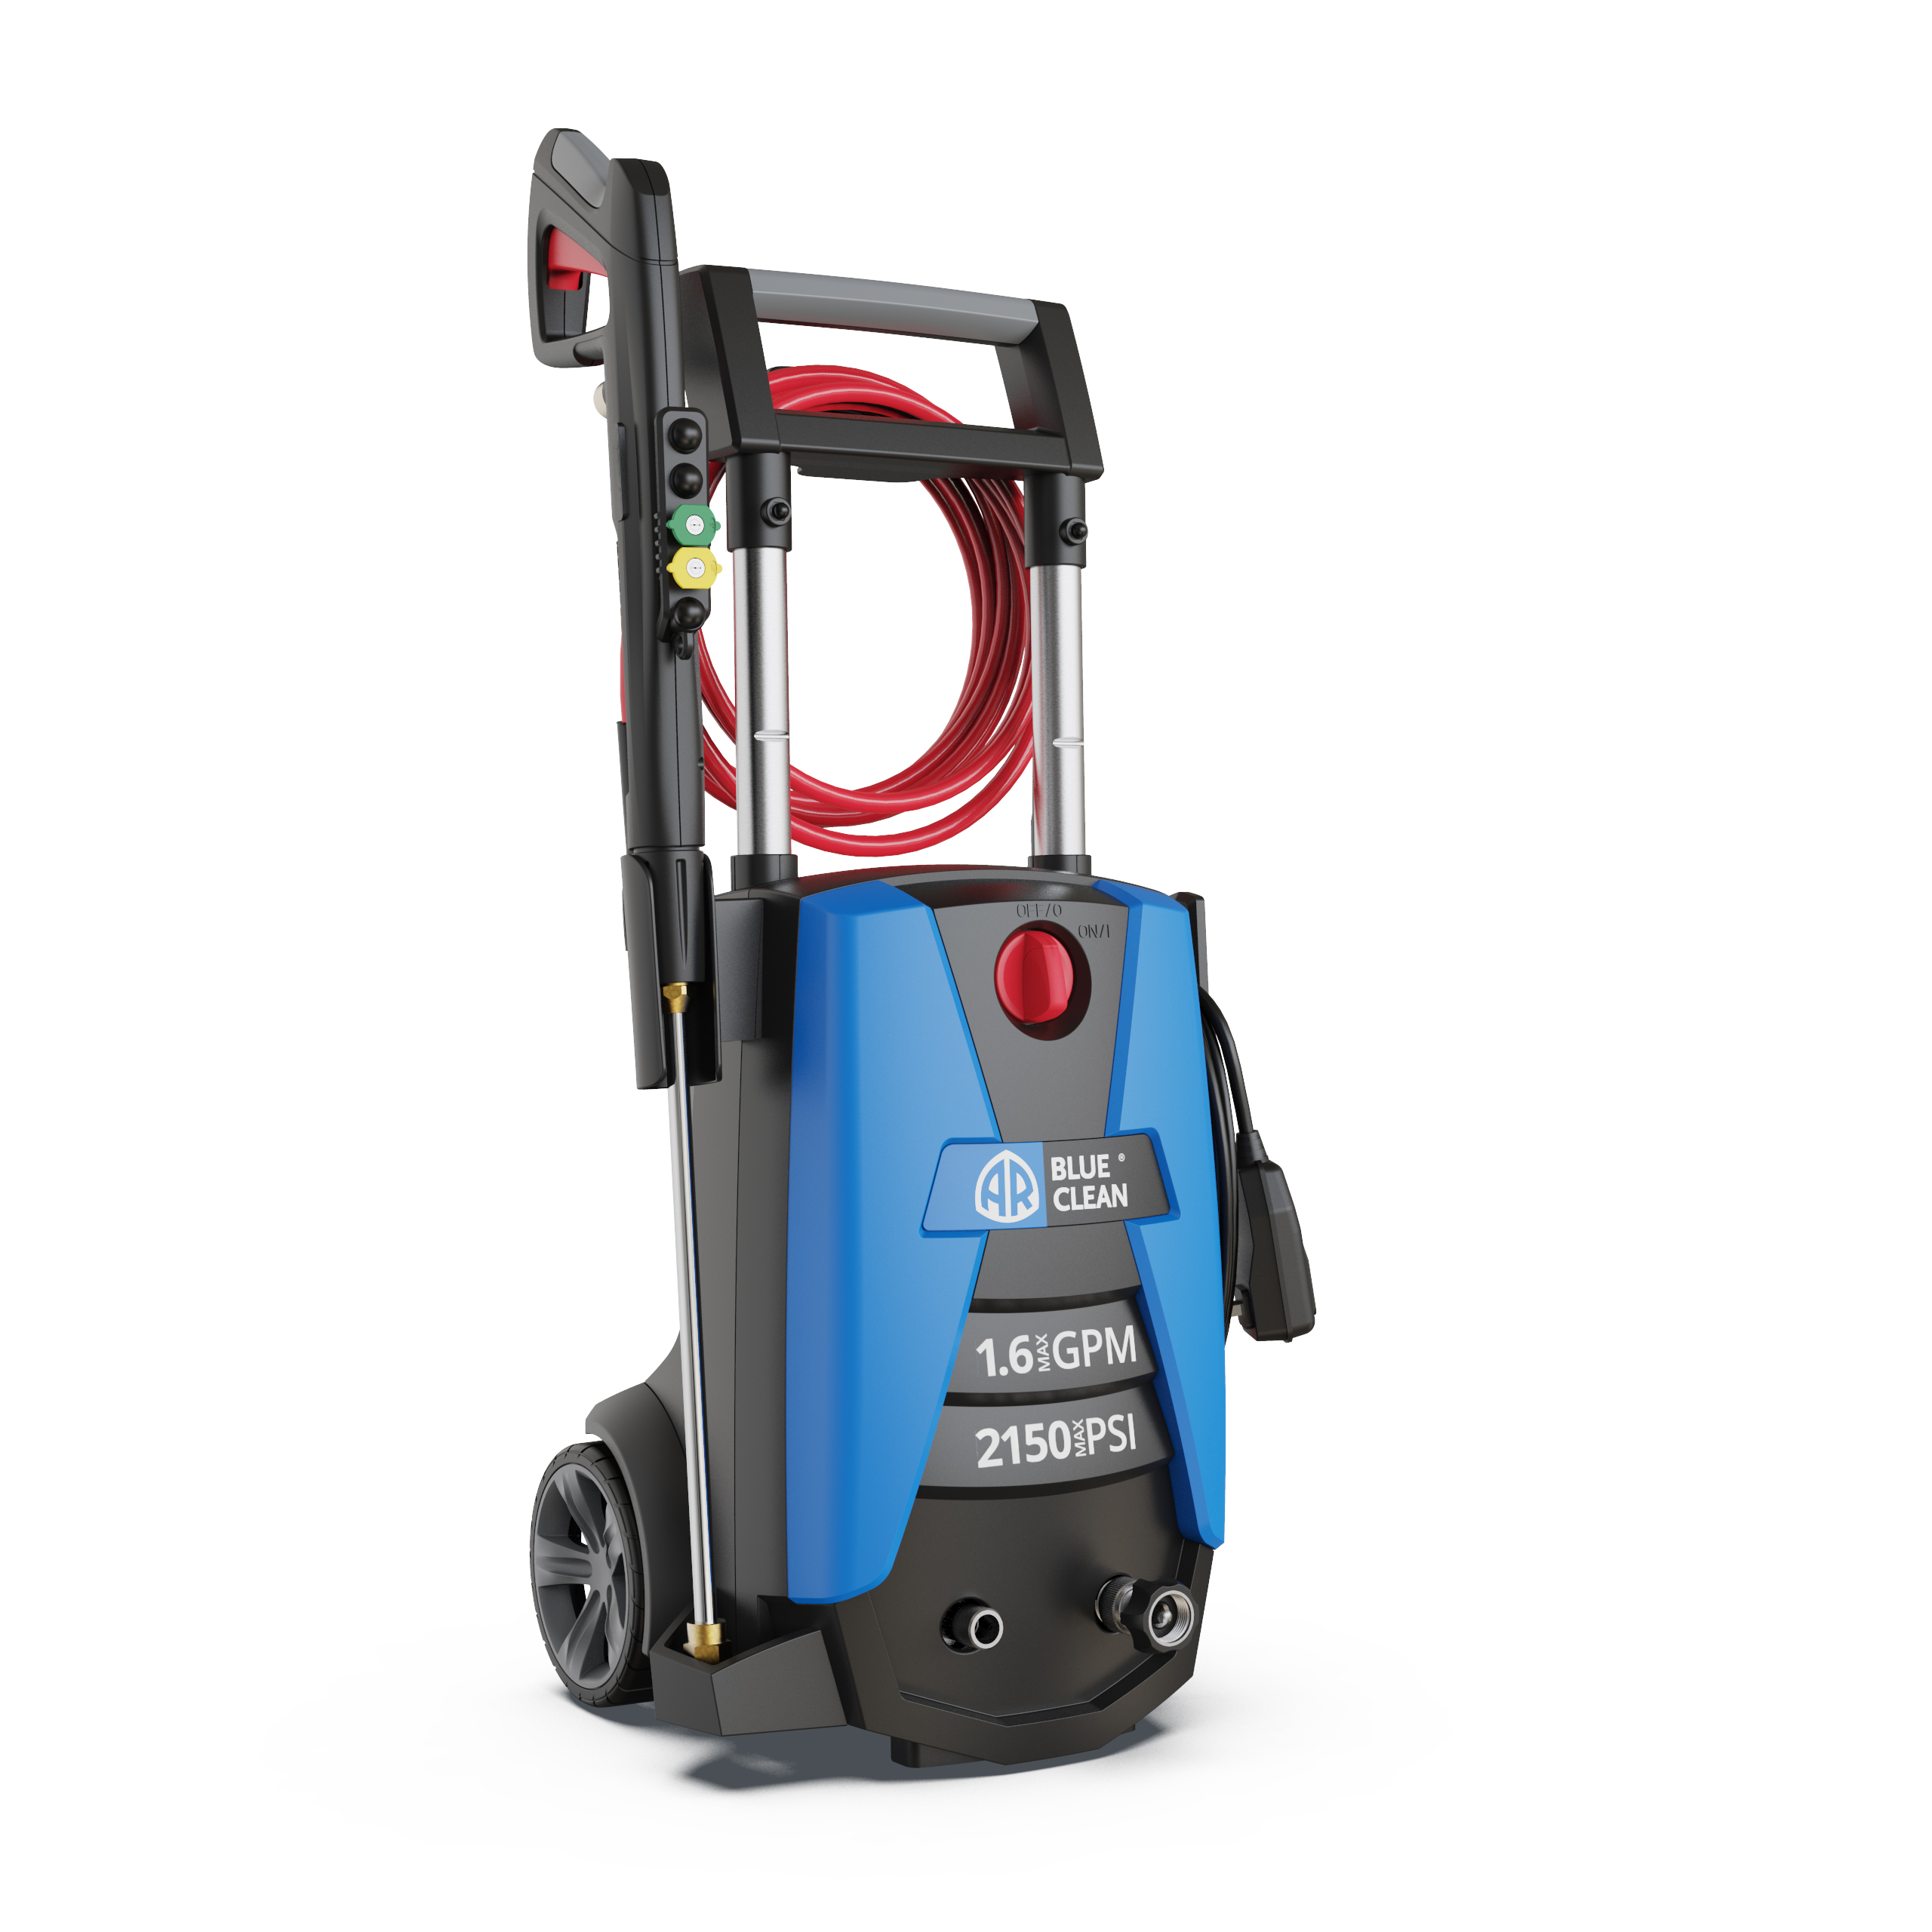 AR Blue Clean BC383HSS, 2150 PSI, 1.6 GPM, 13 amp Electric Pressure Washer Questions & Answers